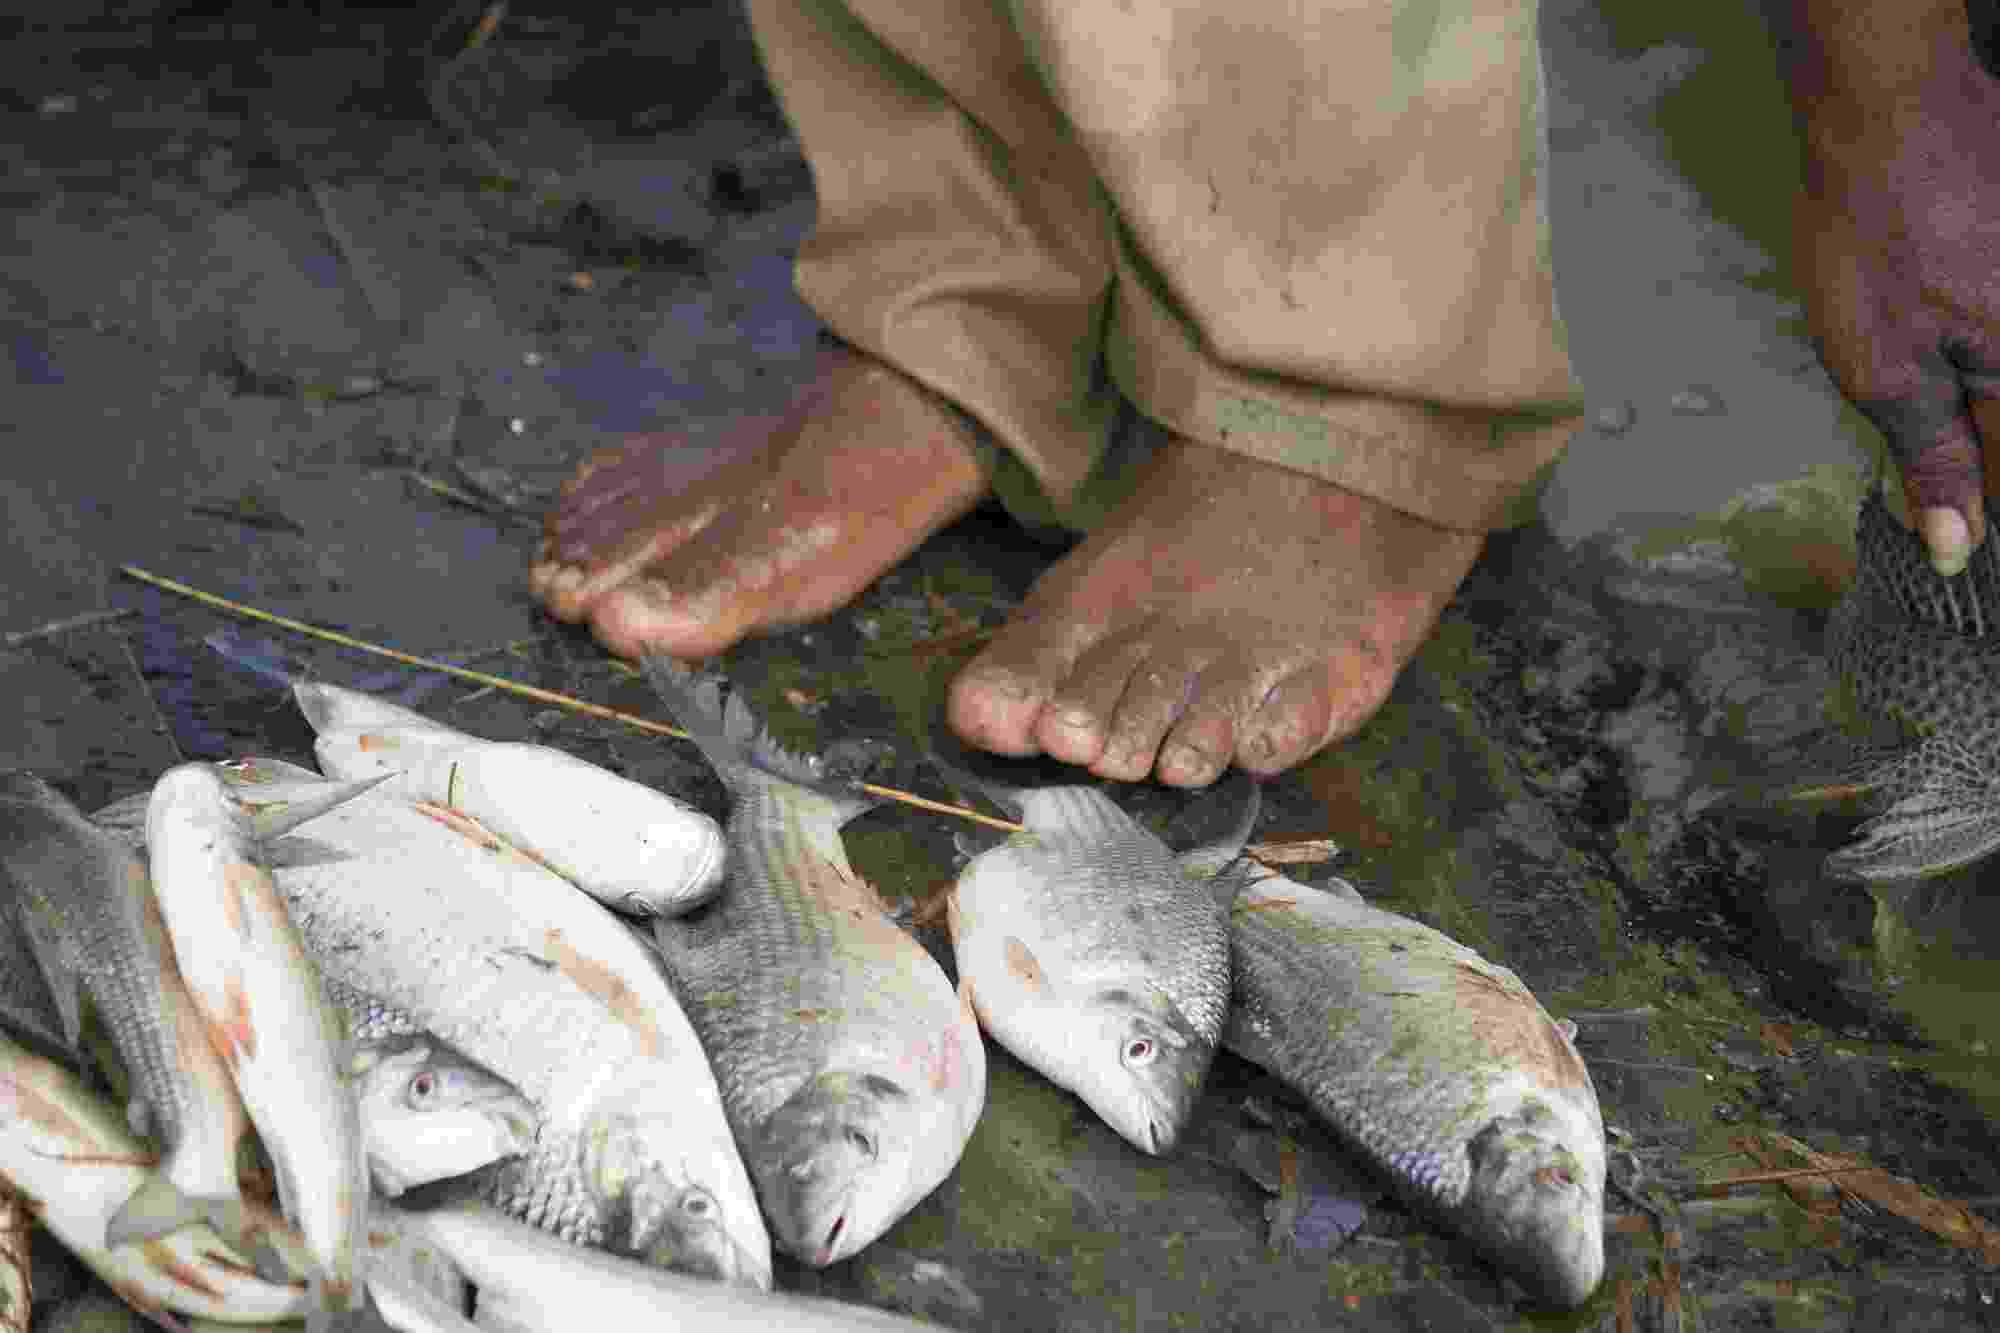 A close up of a mans feet next to his catch of several silver fish, on the wet bottom planks of a boat